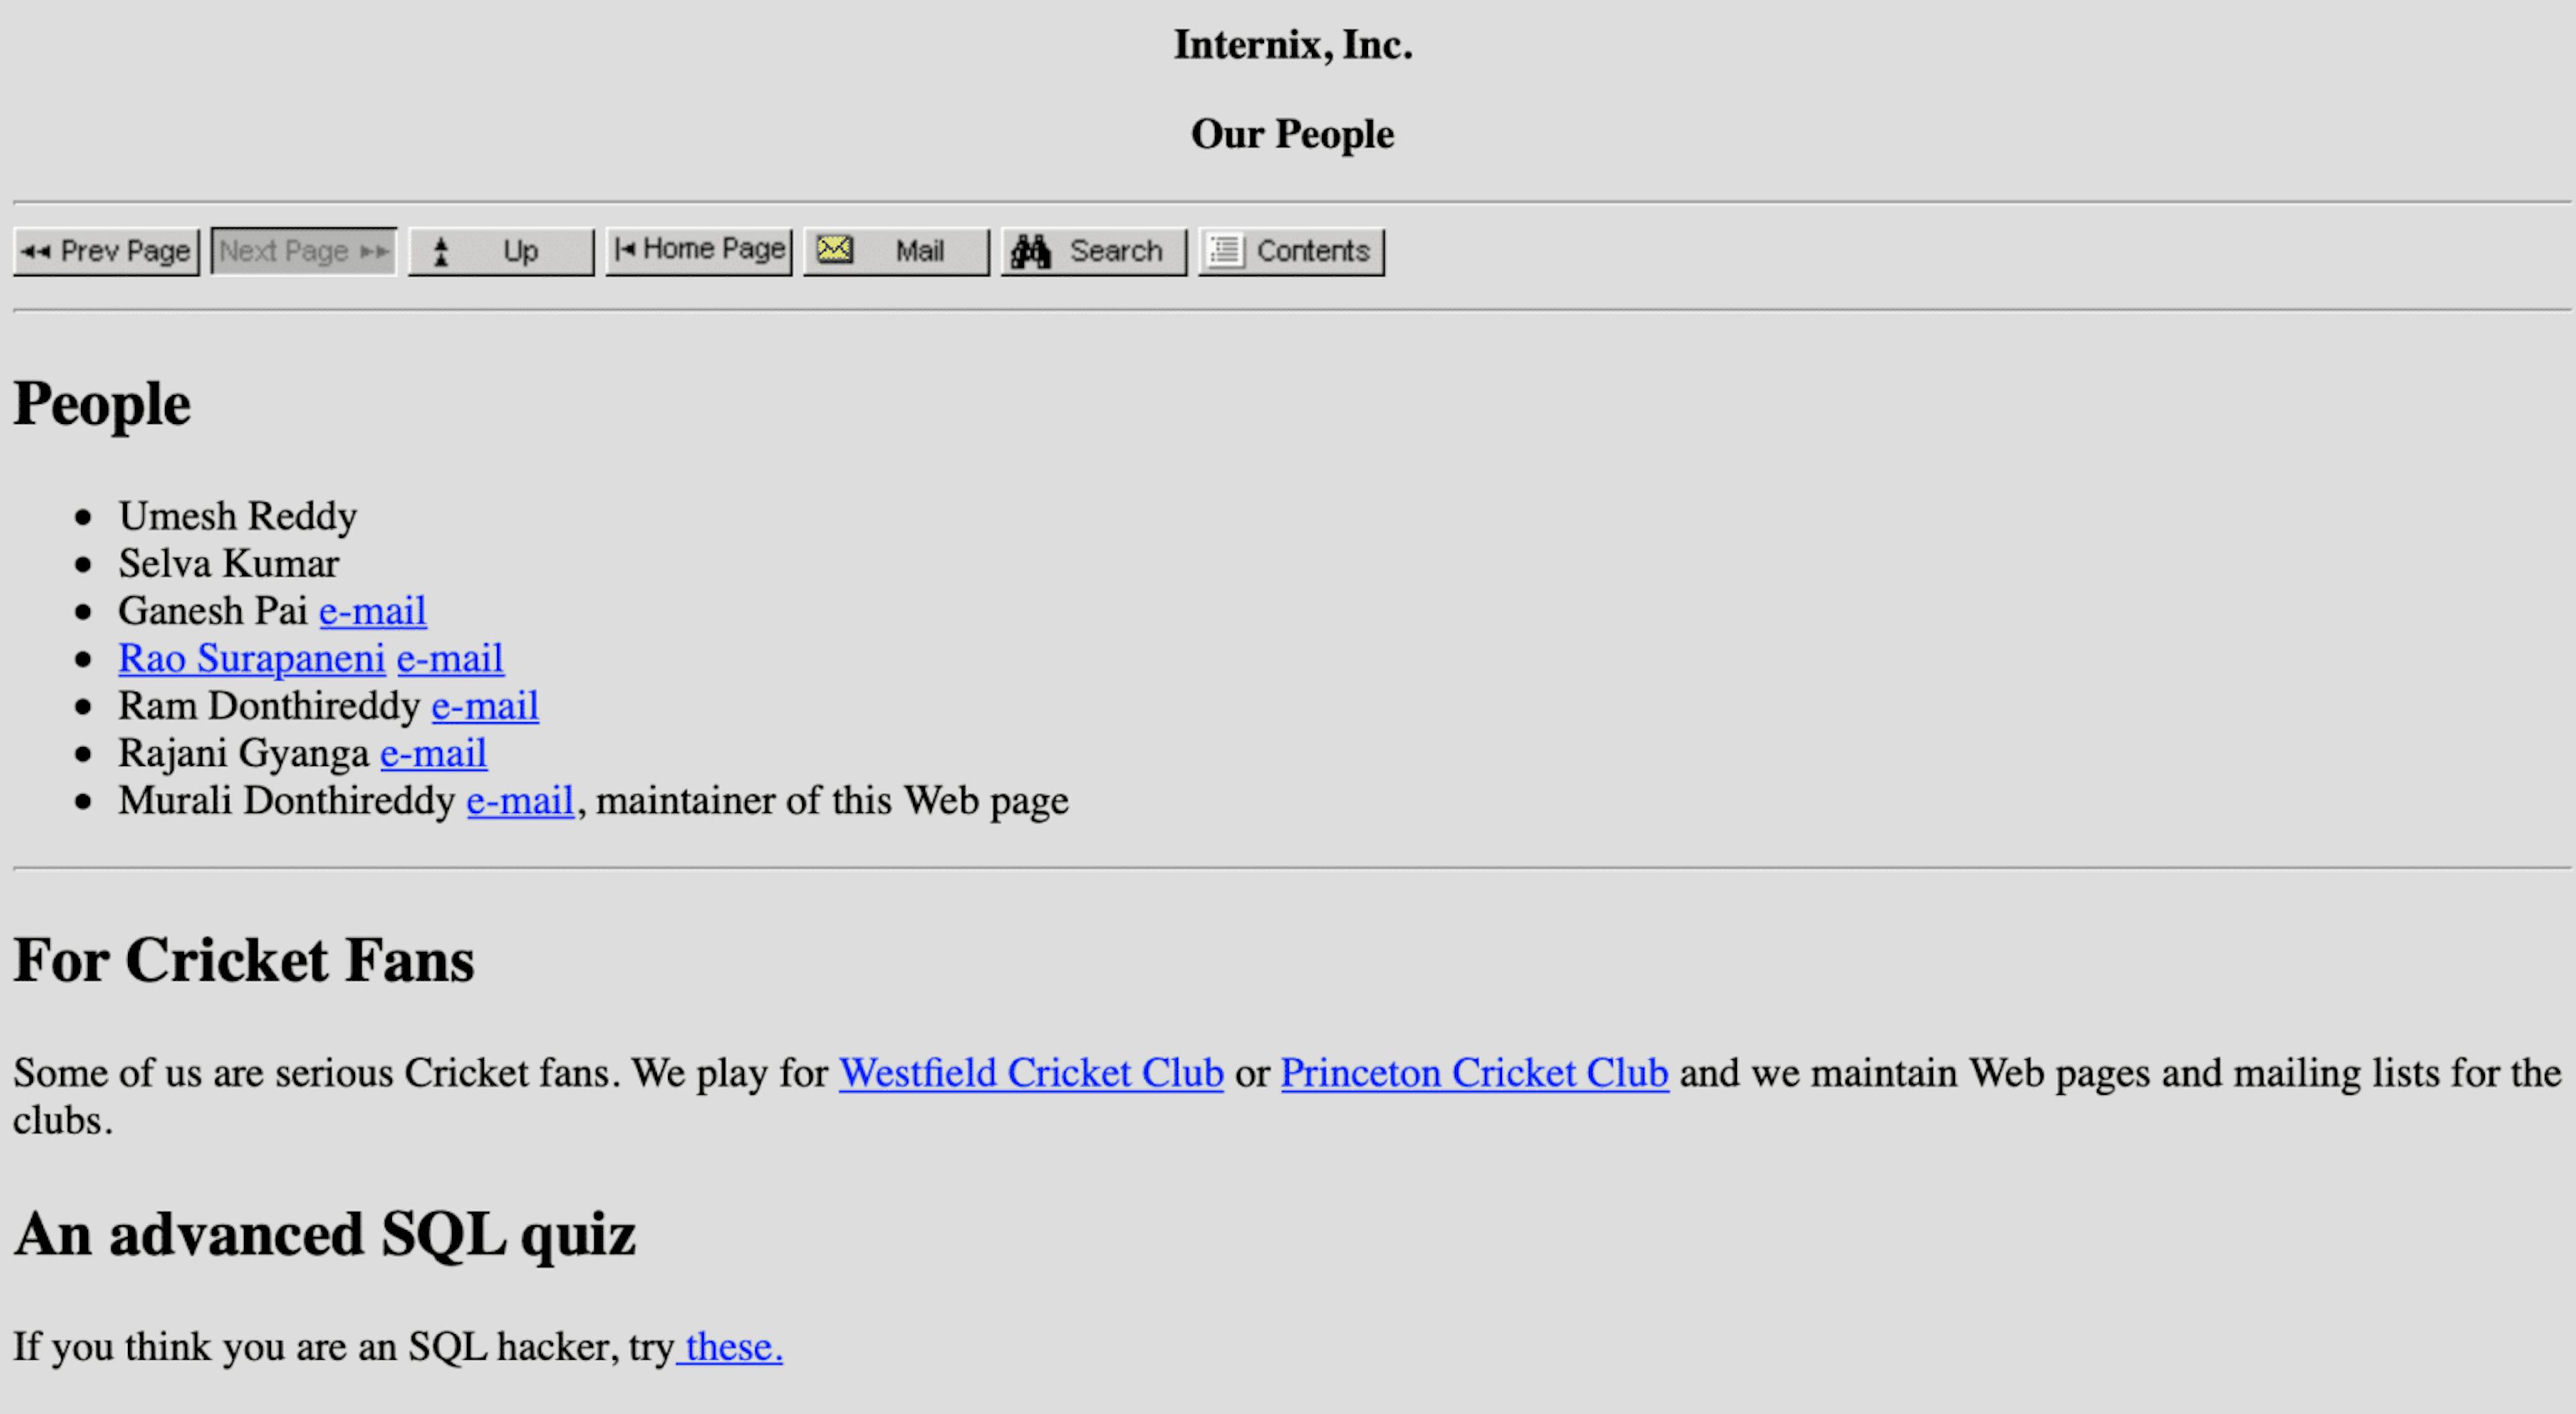 The homepage of another early Internet agency, Internix